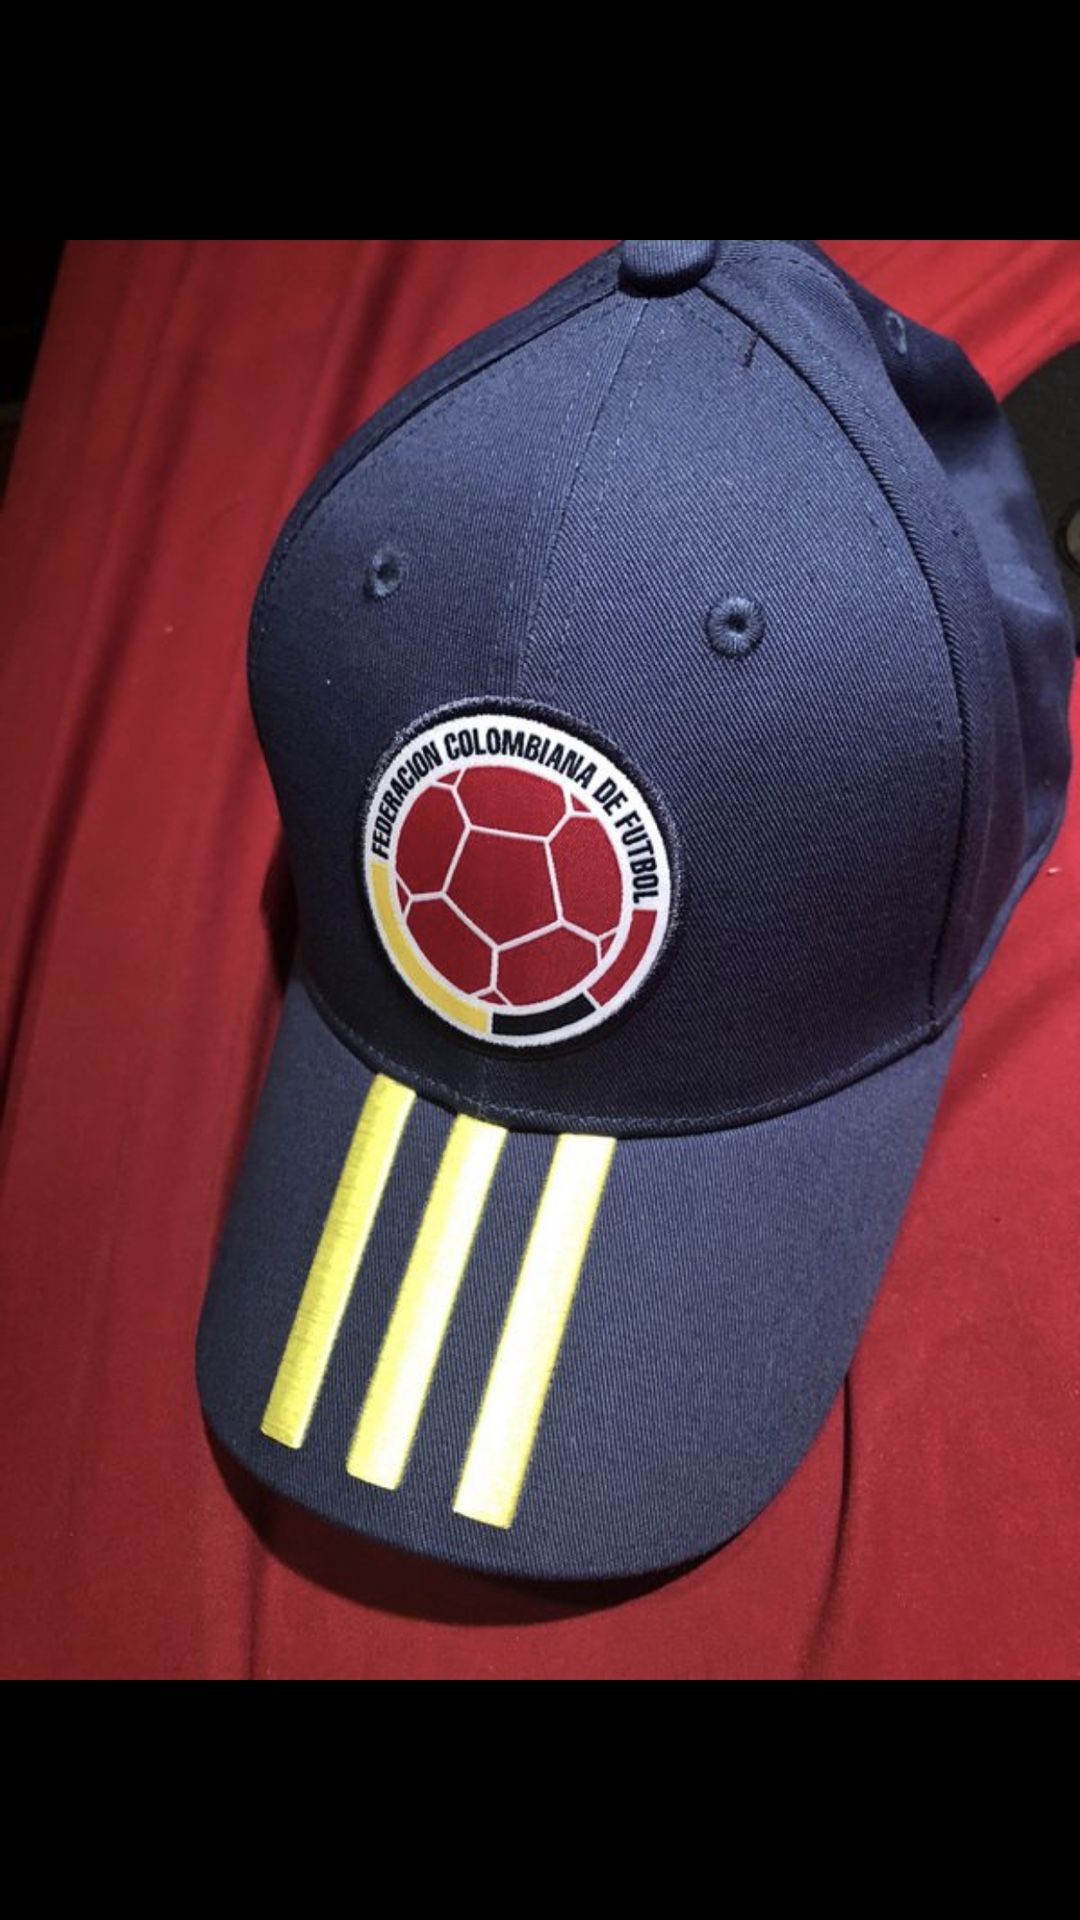 Adidas Colombia hat